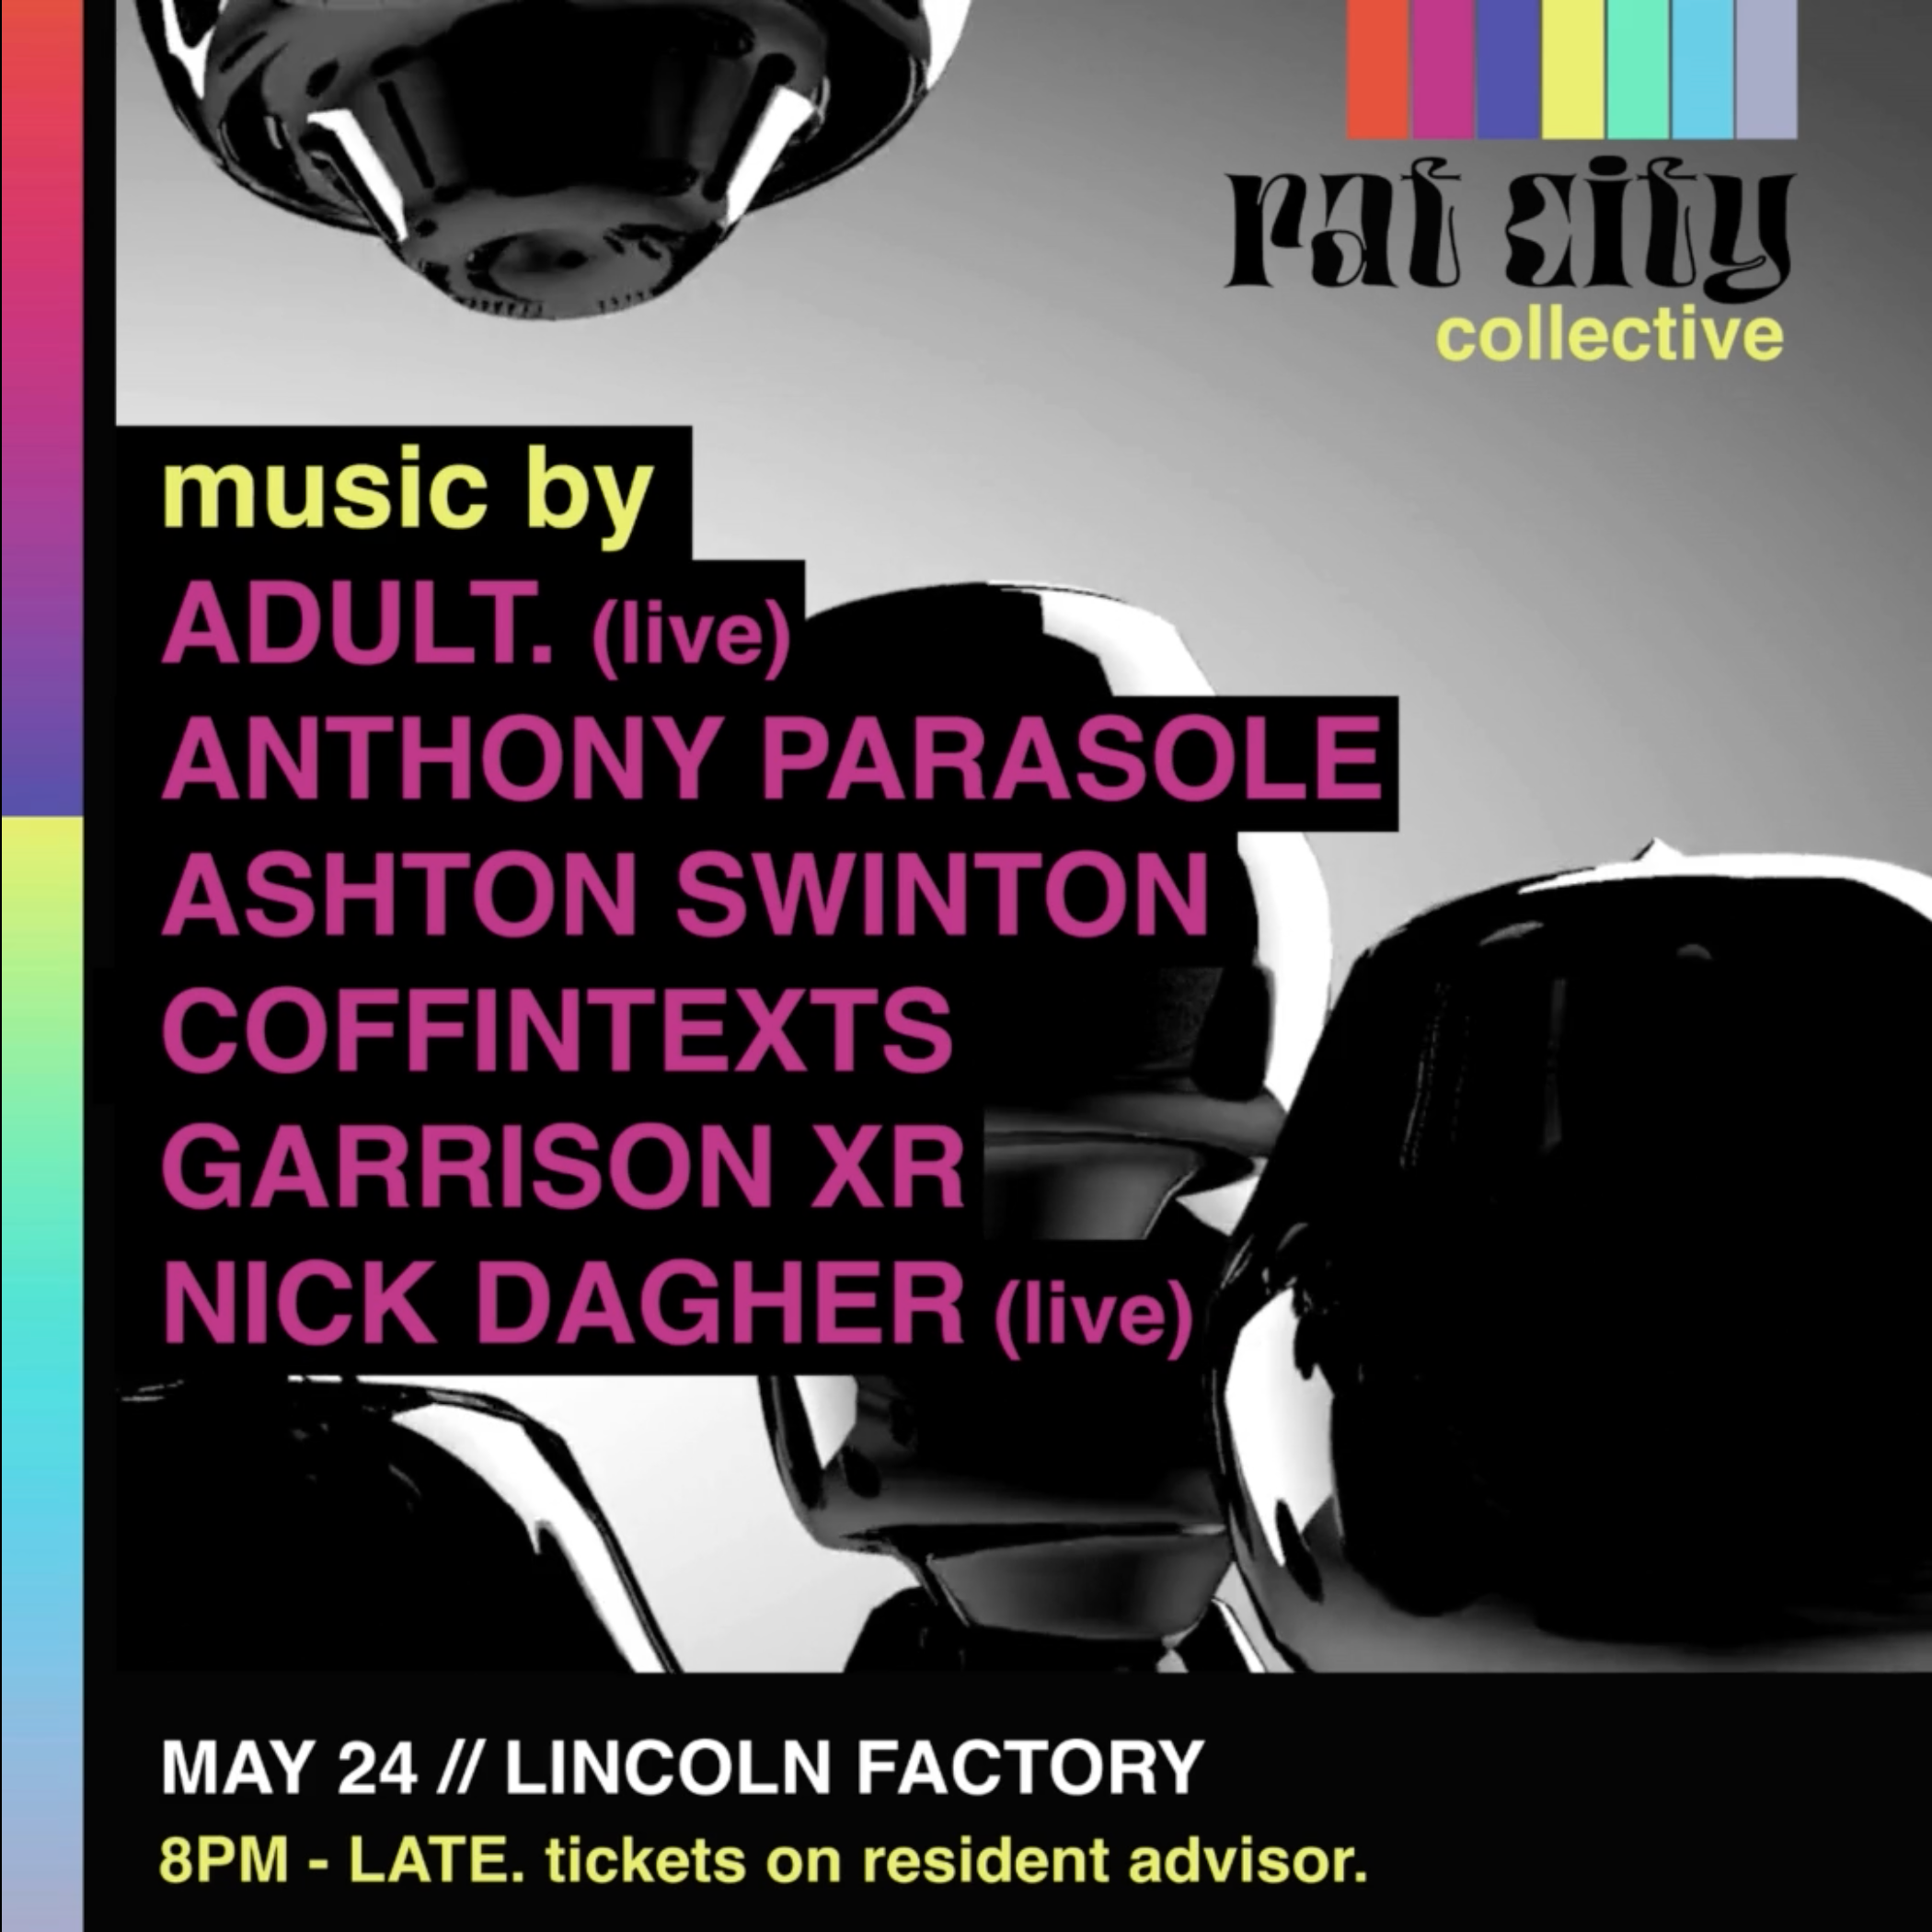 Rat City with ADULT. (live), Anthony Parasole and Coffintexts - Página frontal